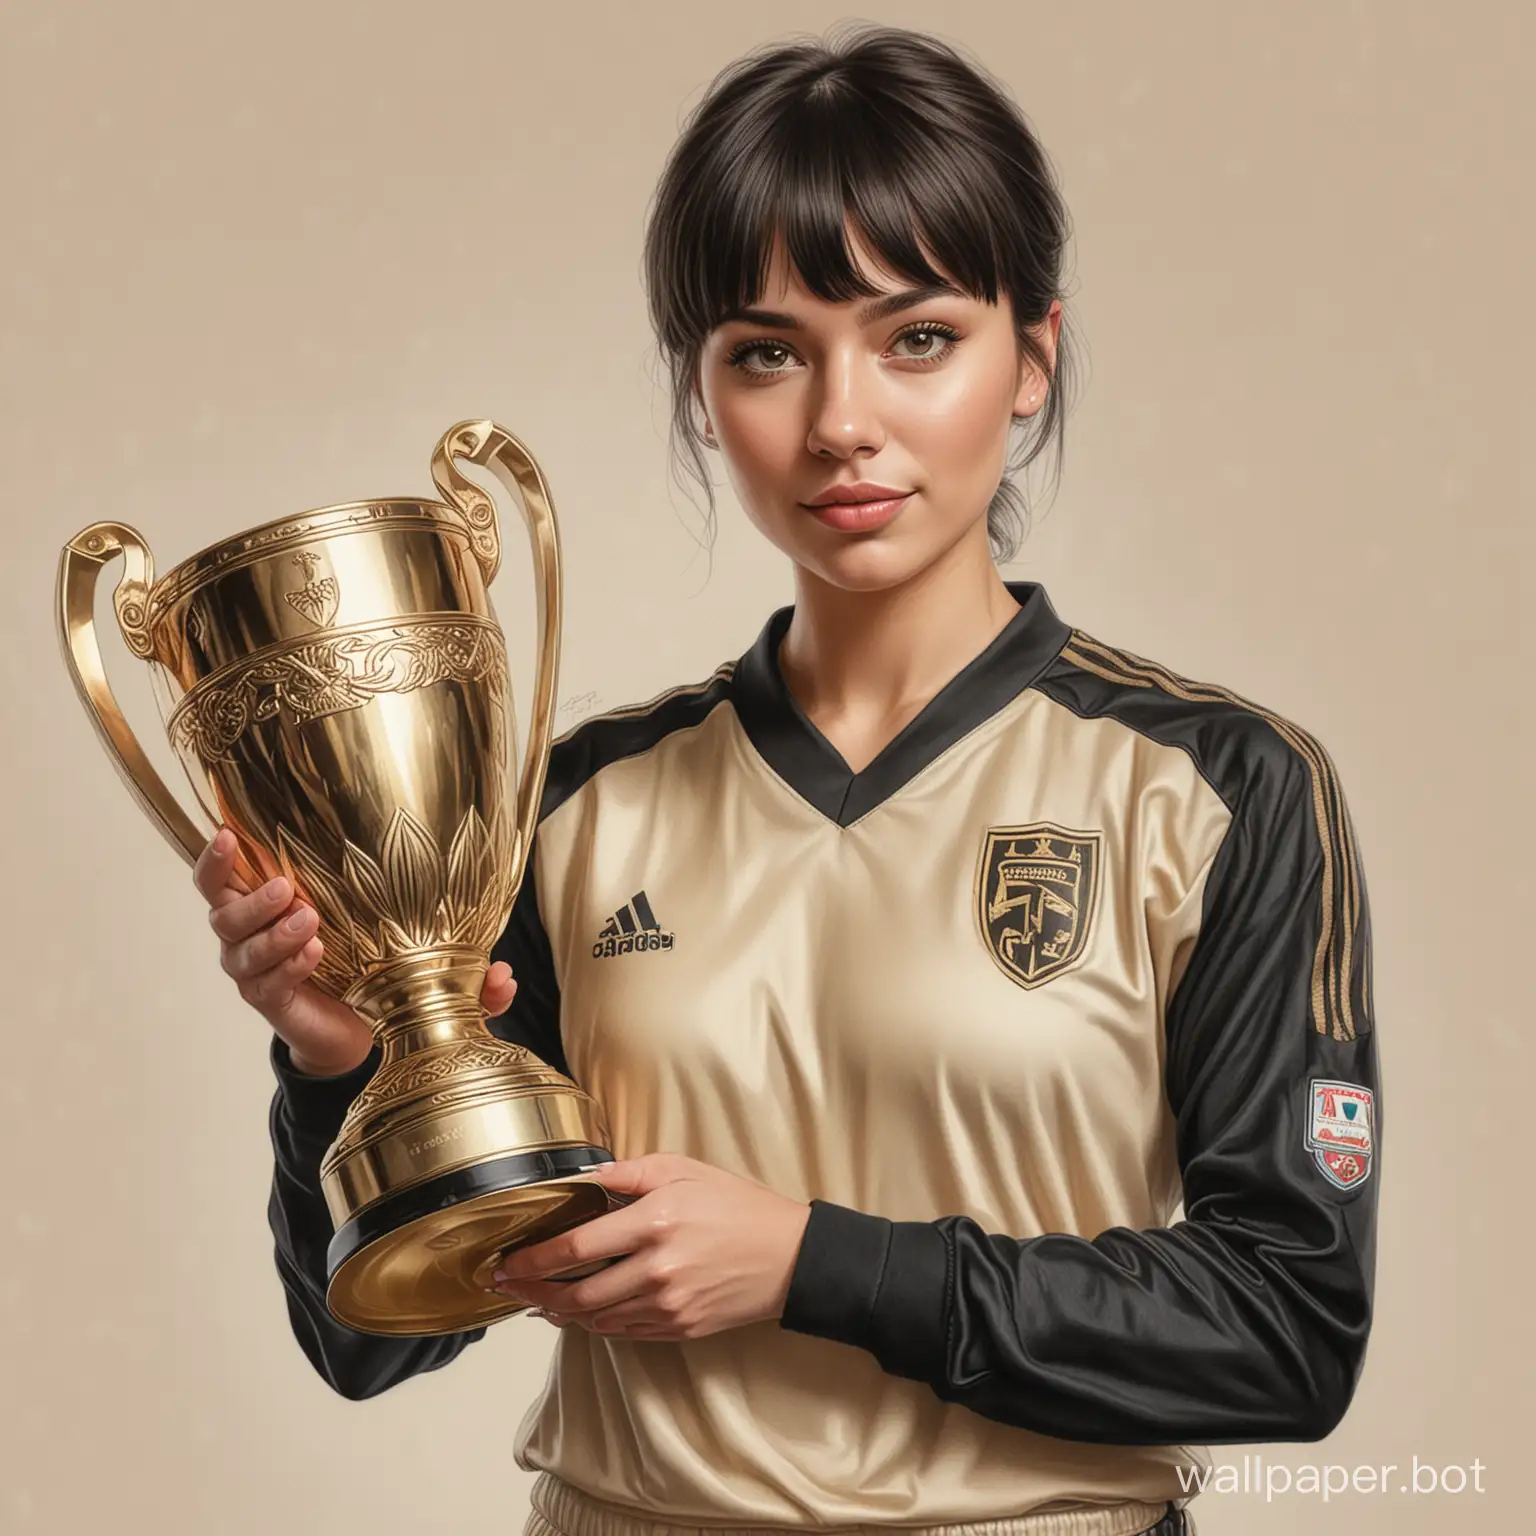 Sketch of Alina Lanina, 25 years old, dark short hair with bangs, cup size 7, narrow waist, in beige-black soccer uniform, holding a large Champions Cup on a white background, very realistic drawing with colored pencil.